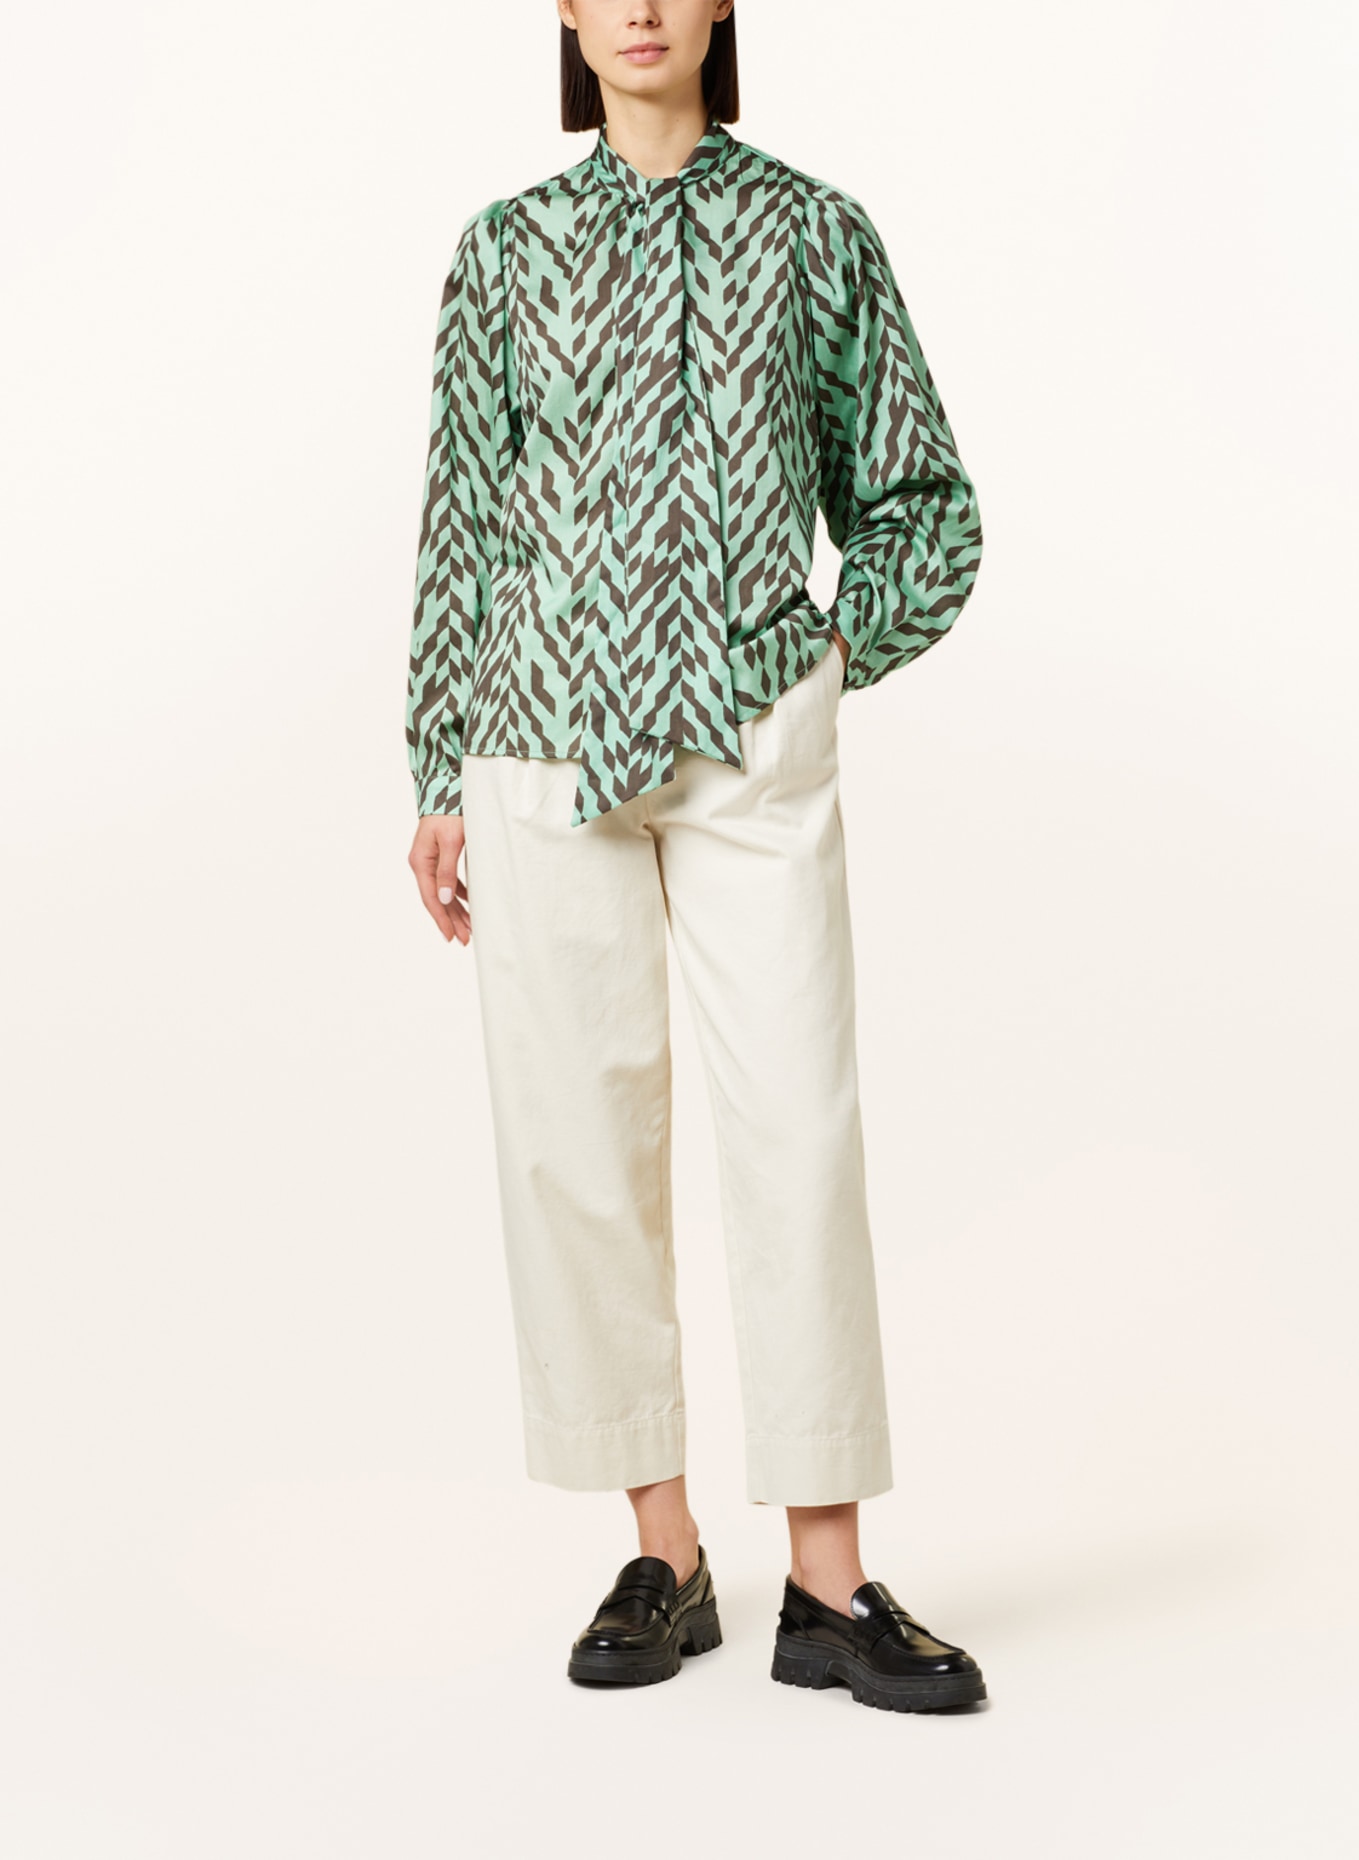 BEAUMONT Bow-tie blouse KIM, Color: LIGHT GREEN/ BROWN (Image 2)